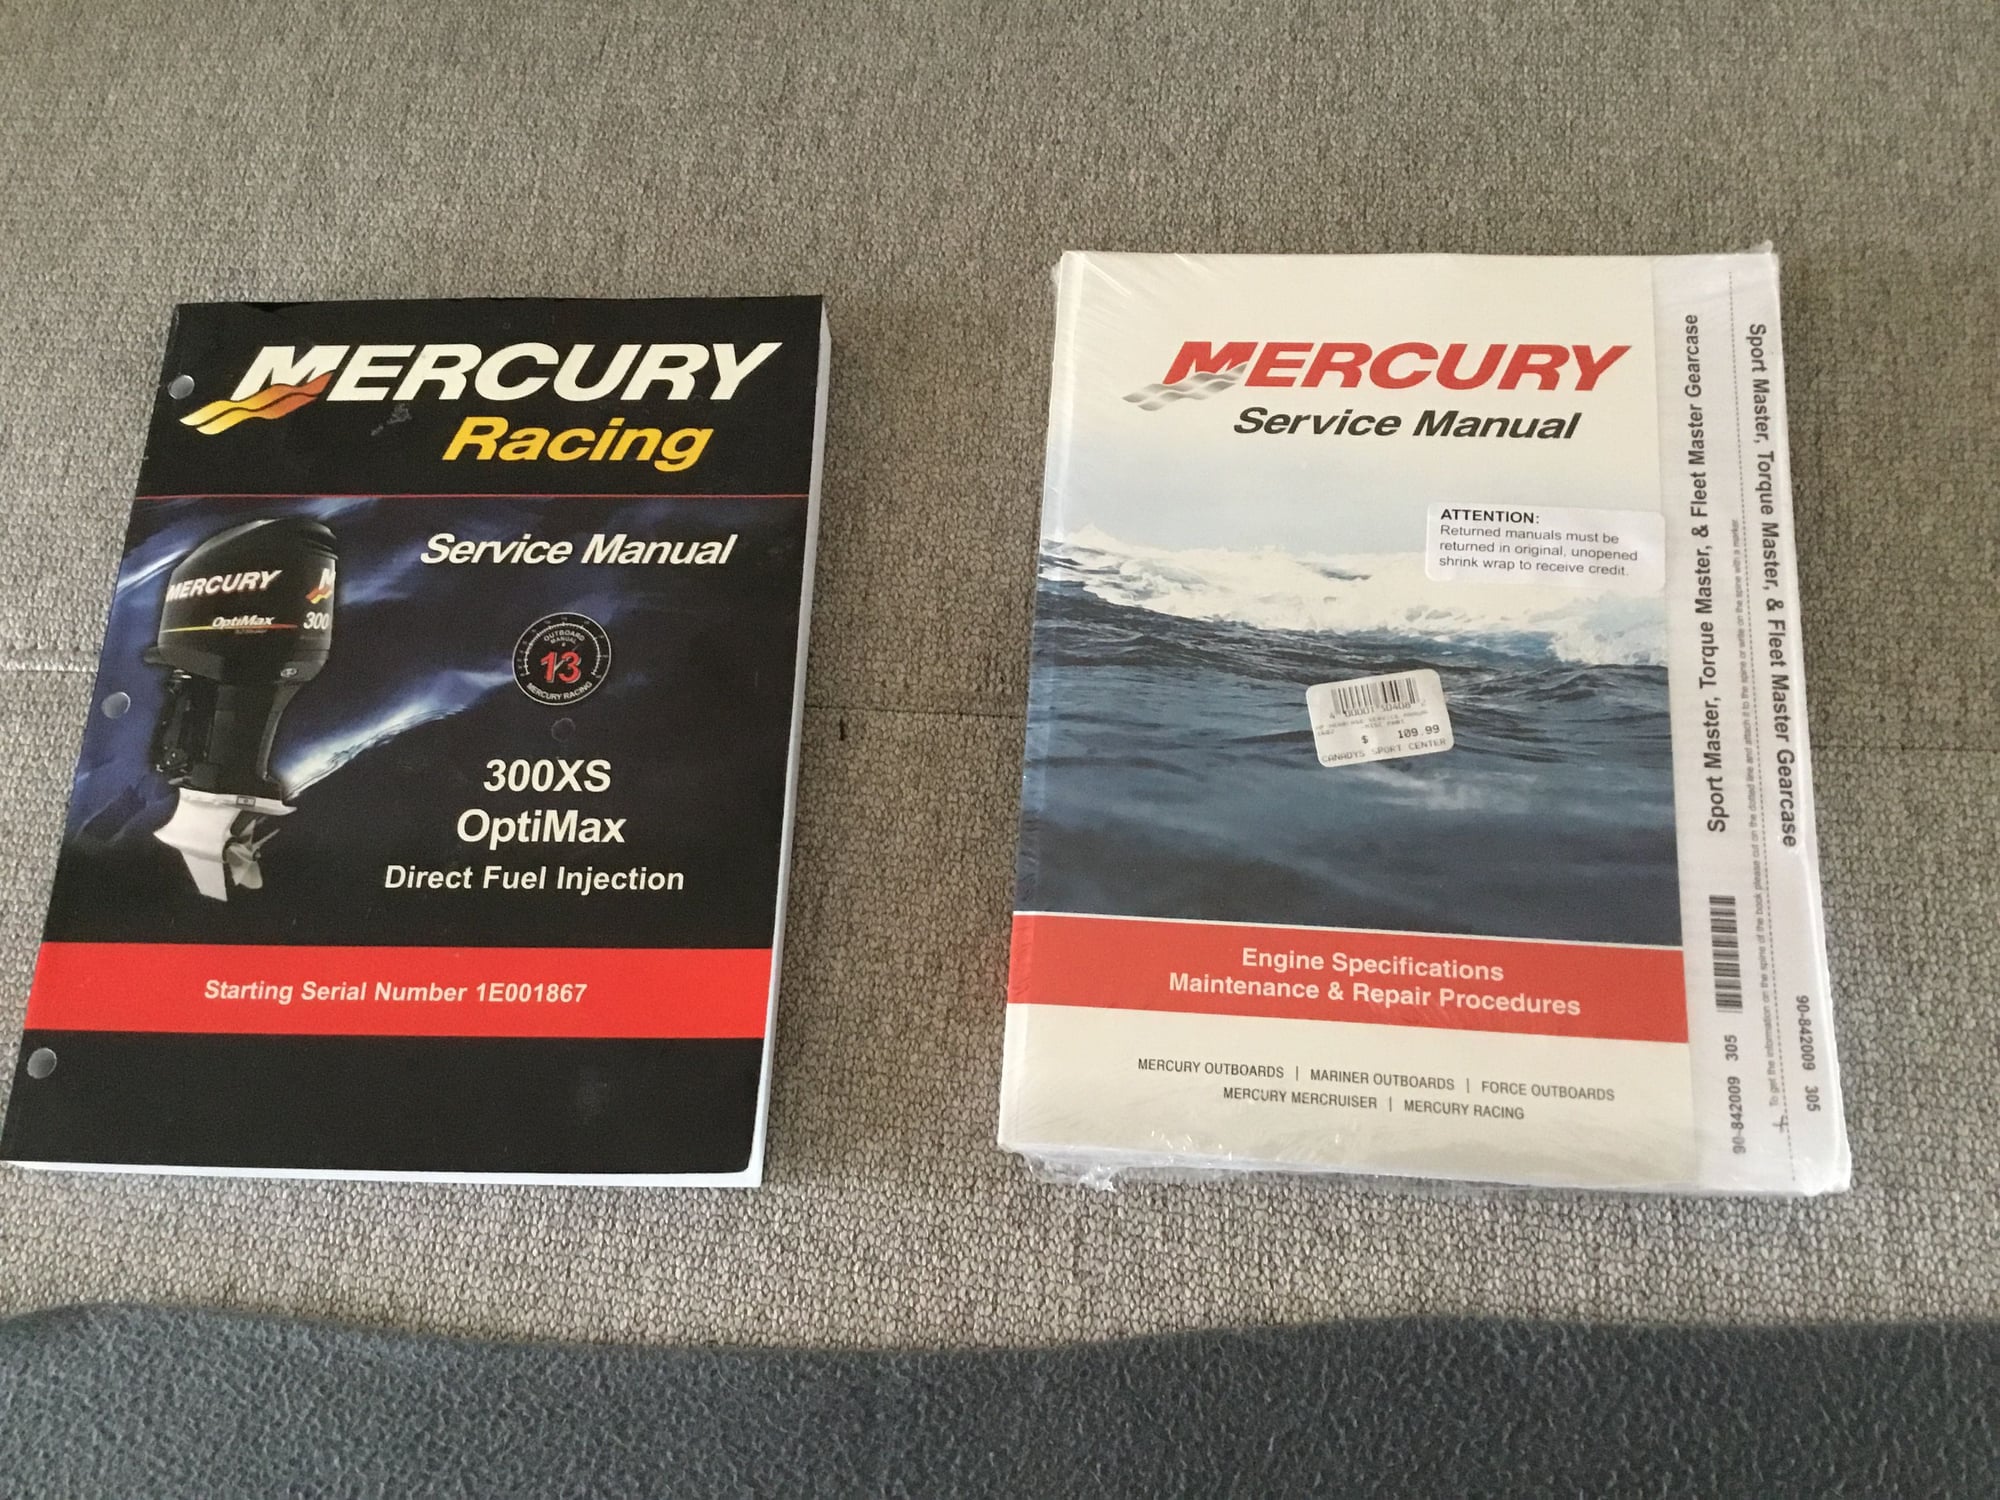 The Hull Truth - Boating and Fishing Forum - Mercury Service manuals